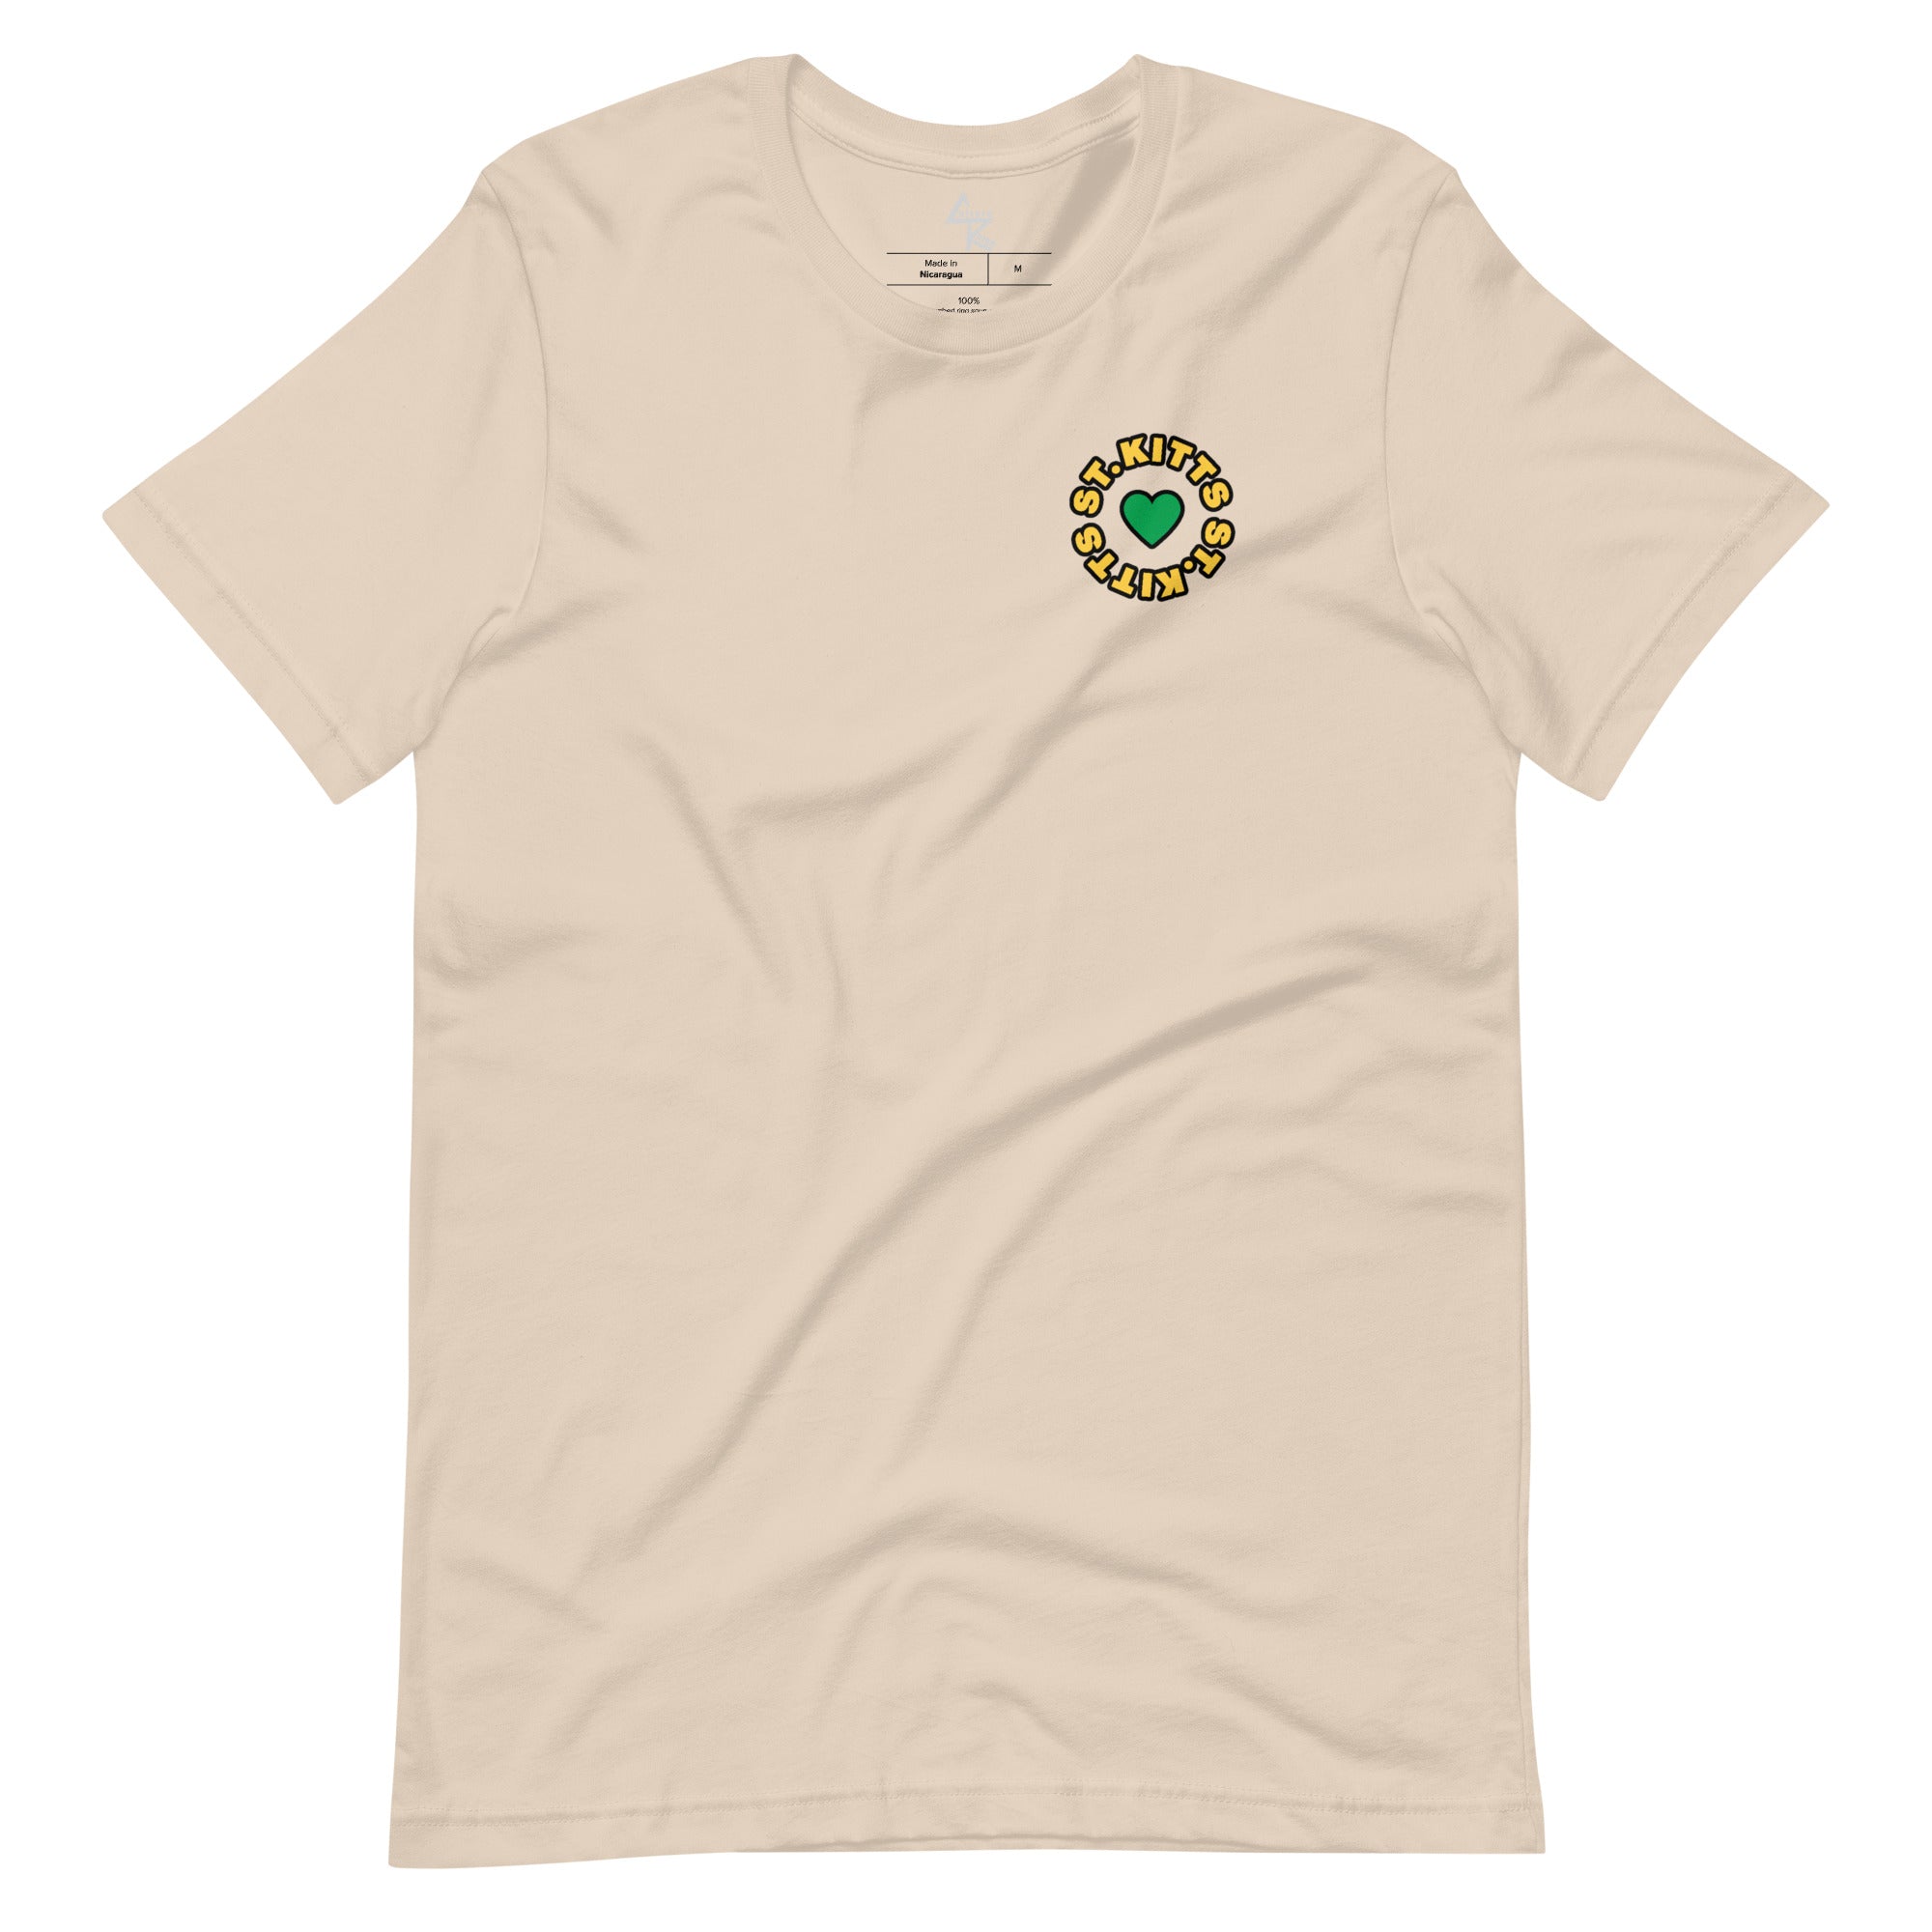 Adult Caribbean Vibes T-shirt - St. Kitts and Nevis